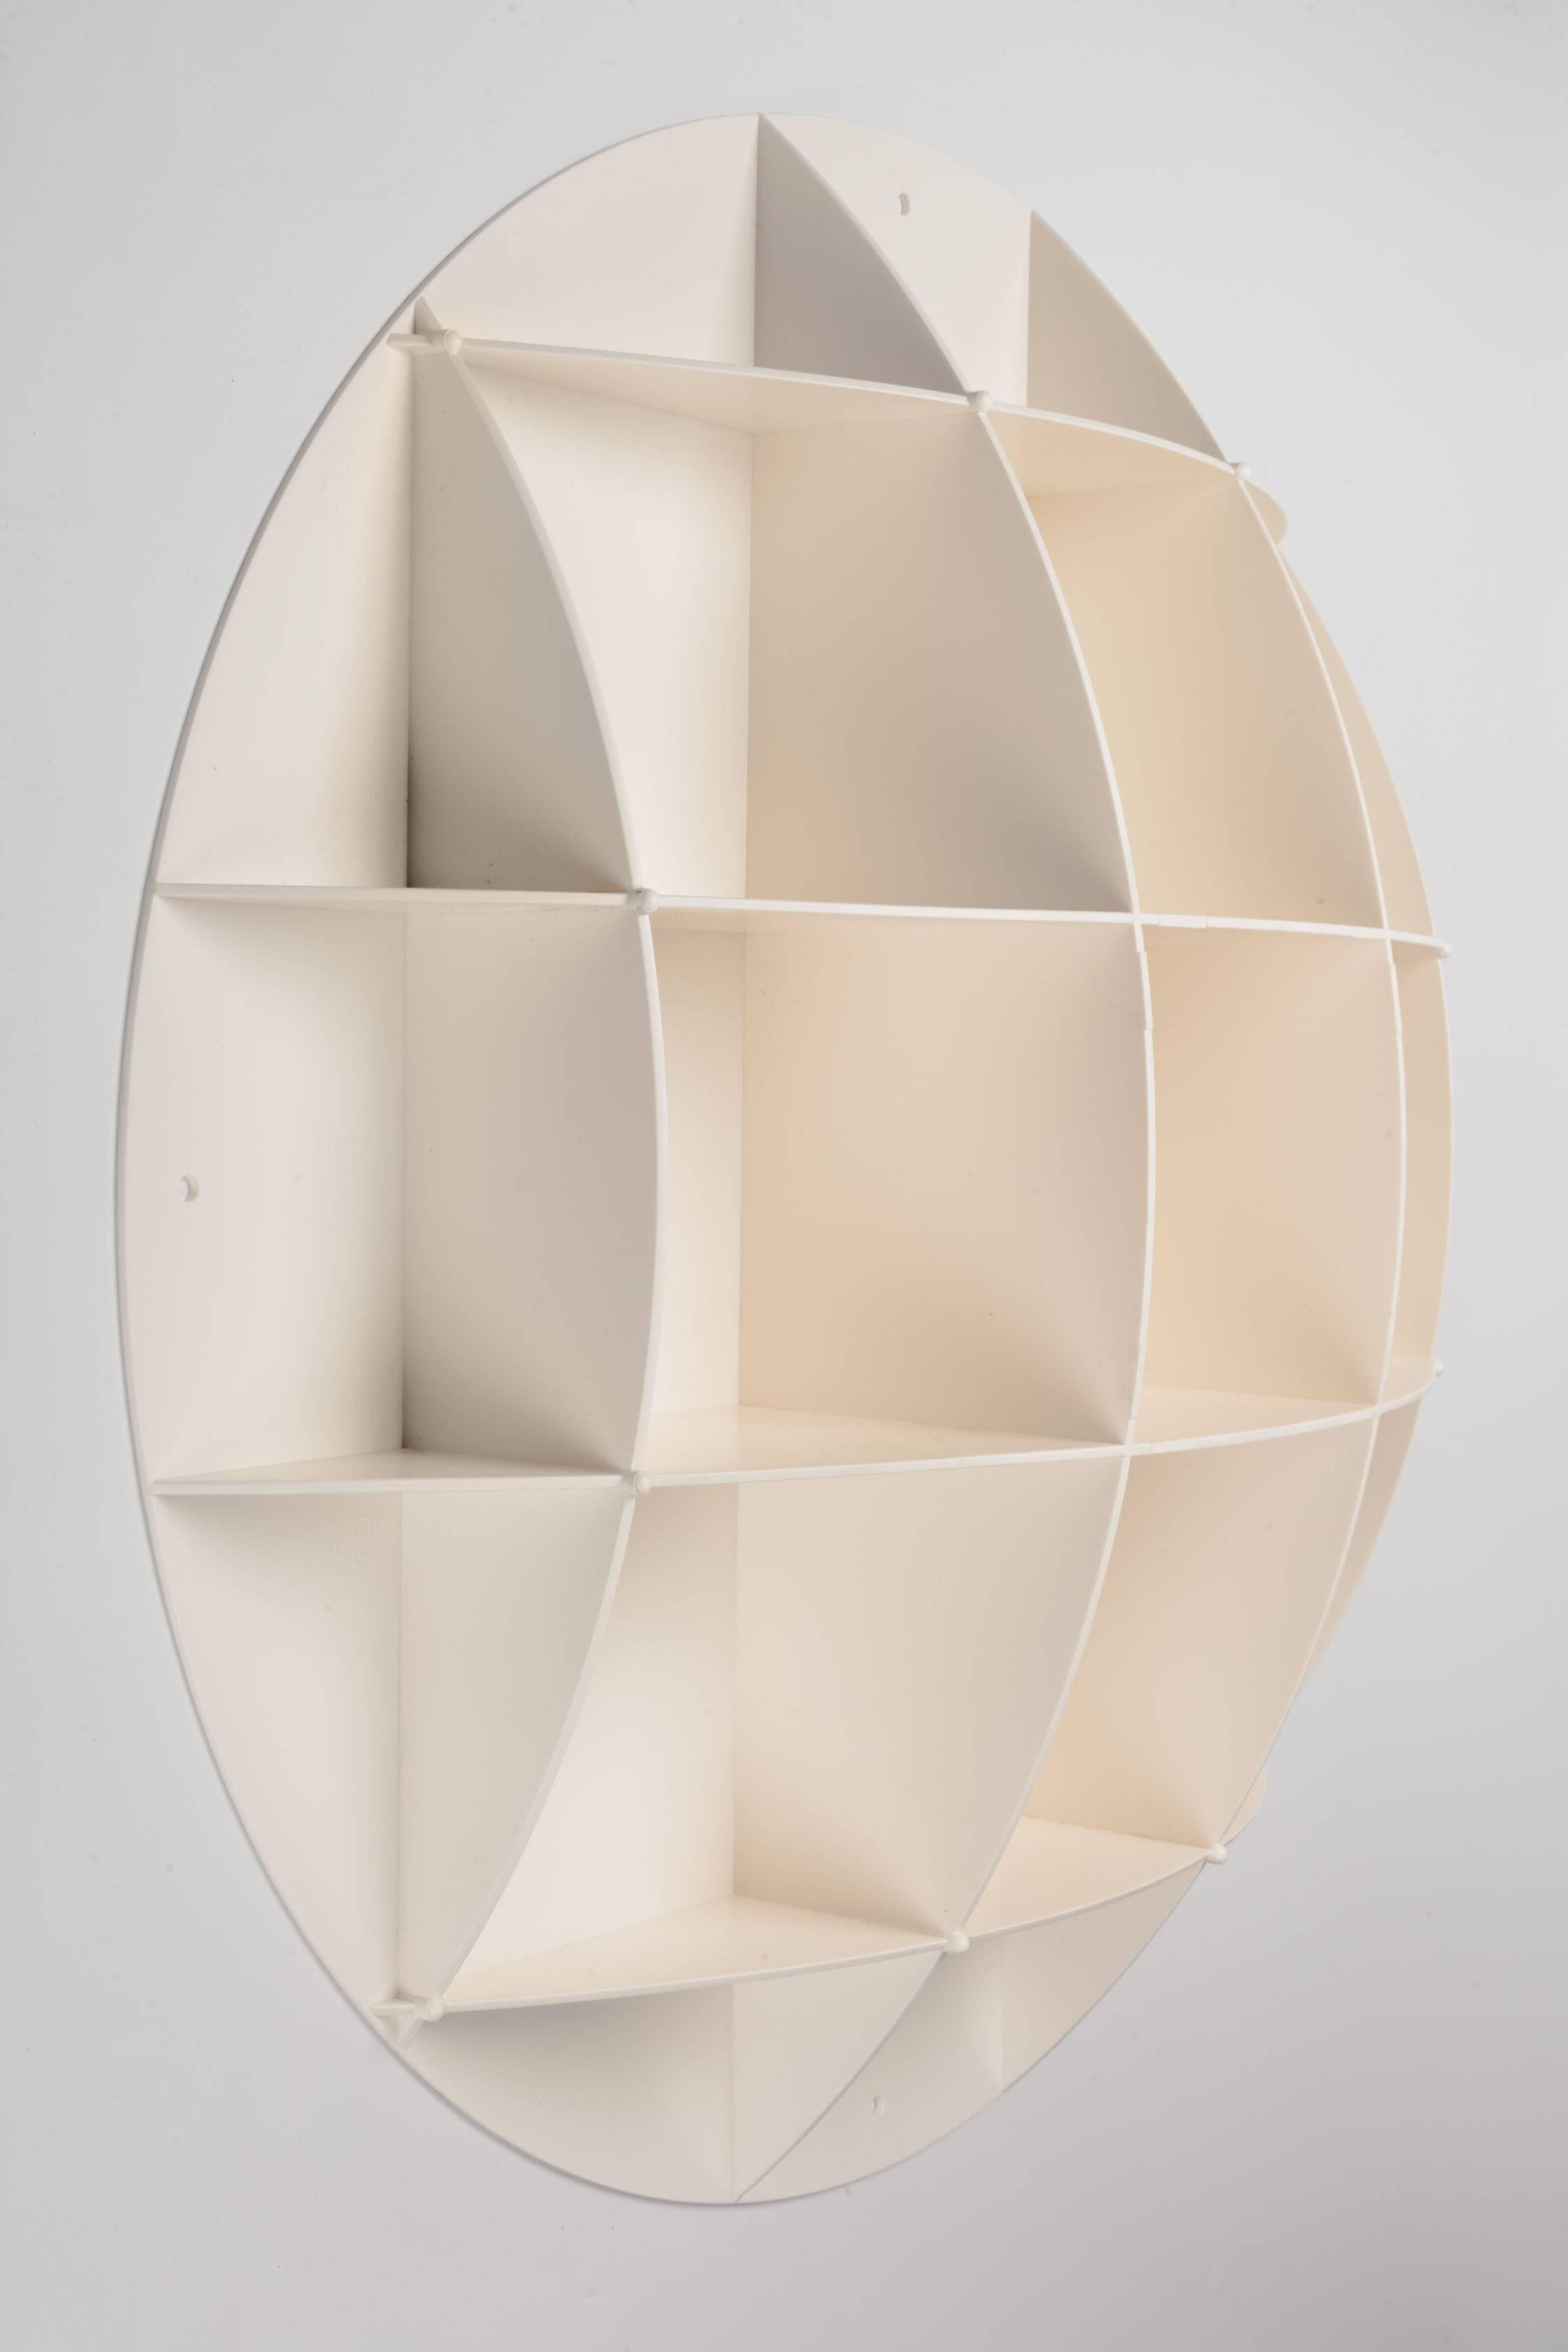 Round shelving unit with half sphere shape. Reminiscent of Joe Columbo's design. Makes the perfect pair of bedside wall shelves or medicine cabinets. Can be used empty as a wall decoration or filled to showcase collections of small objects. Limited